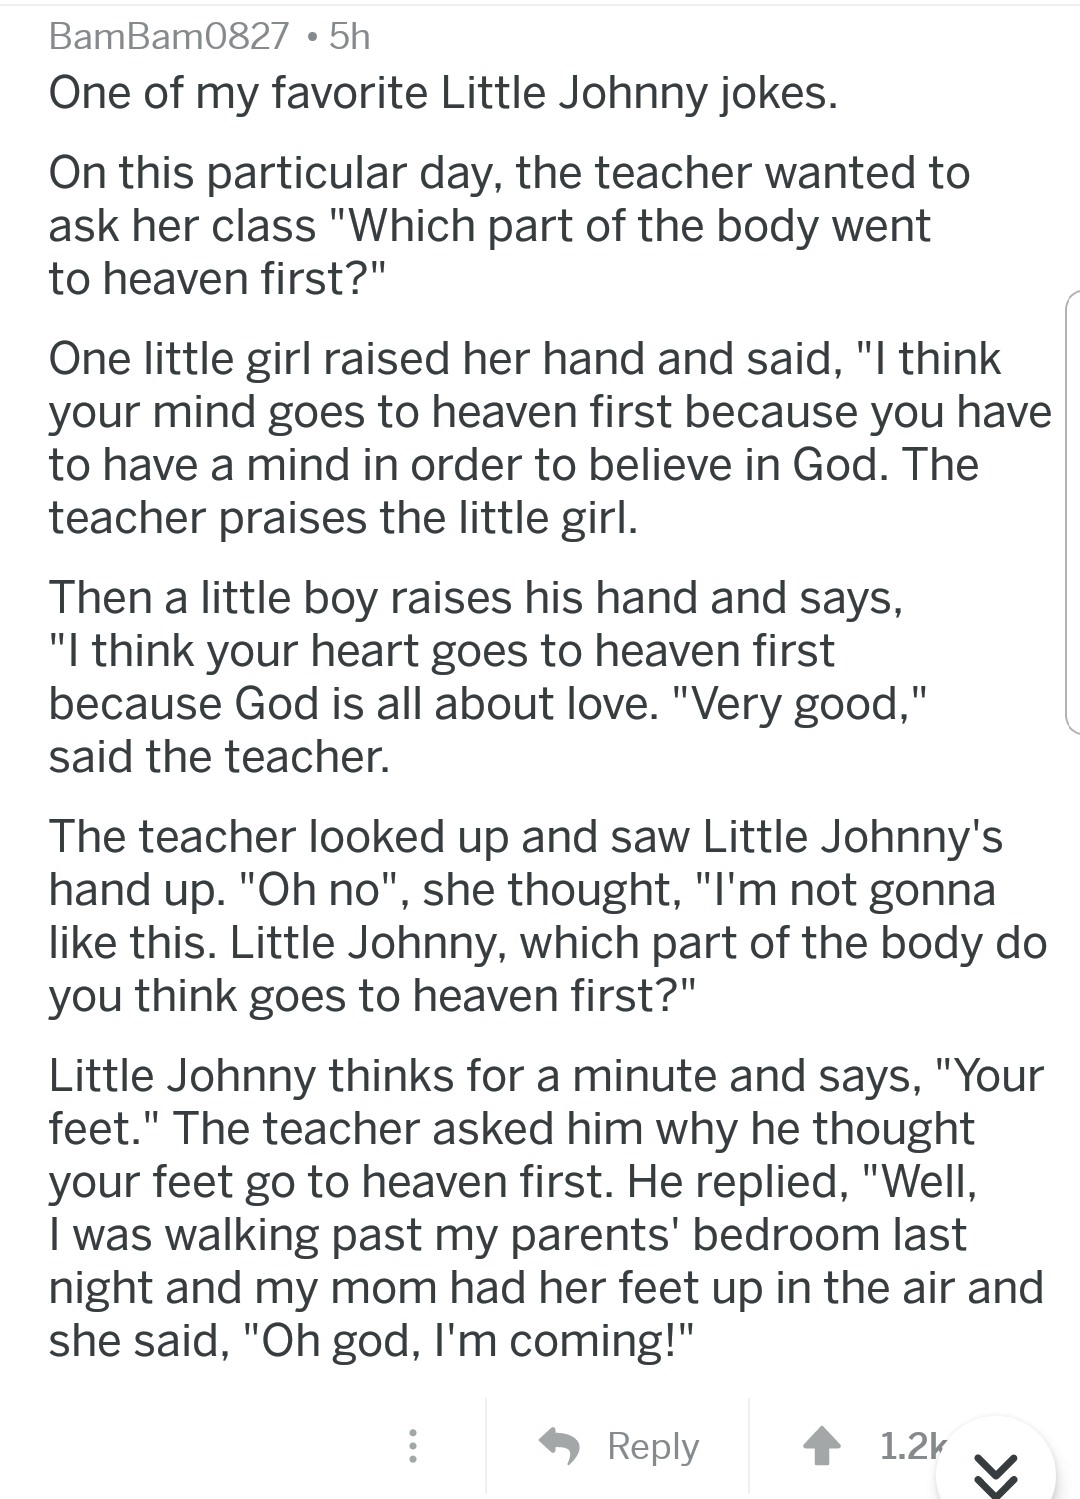 cleopatra poems - BamBam0827 5h One of my favorite Little Johnny jokes. On this particular day, the teacher wanted to ask her class "Which part of the body went to heaven first?" One little girl raised her hand and said, "I think your mind goes to heaven 